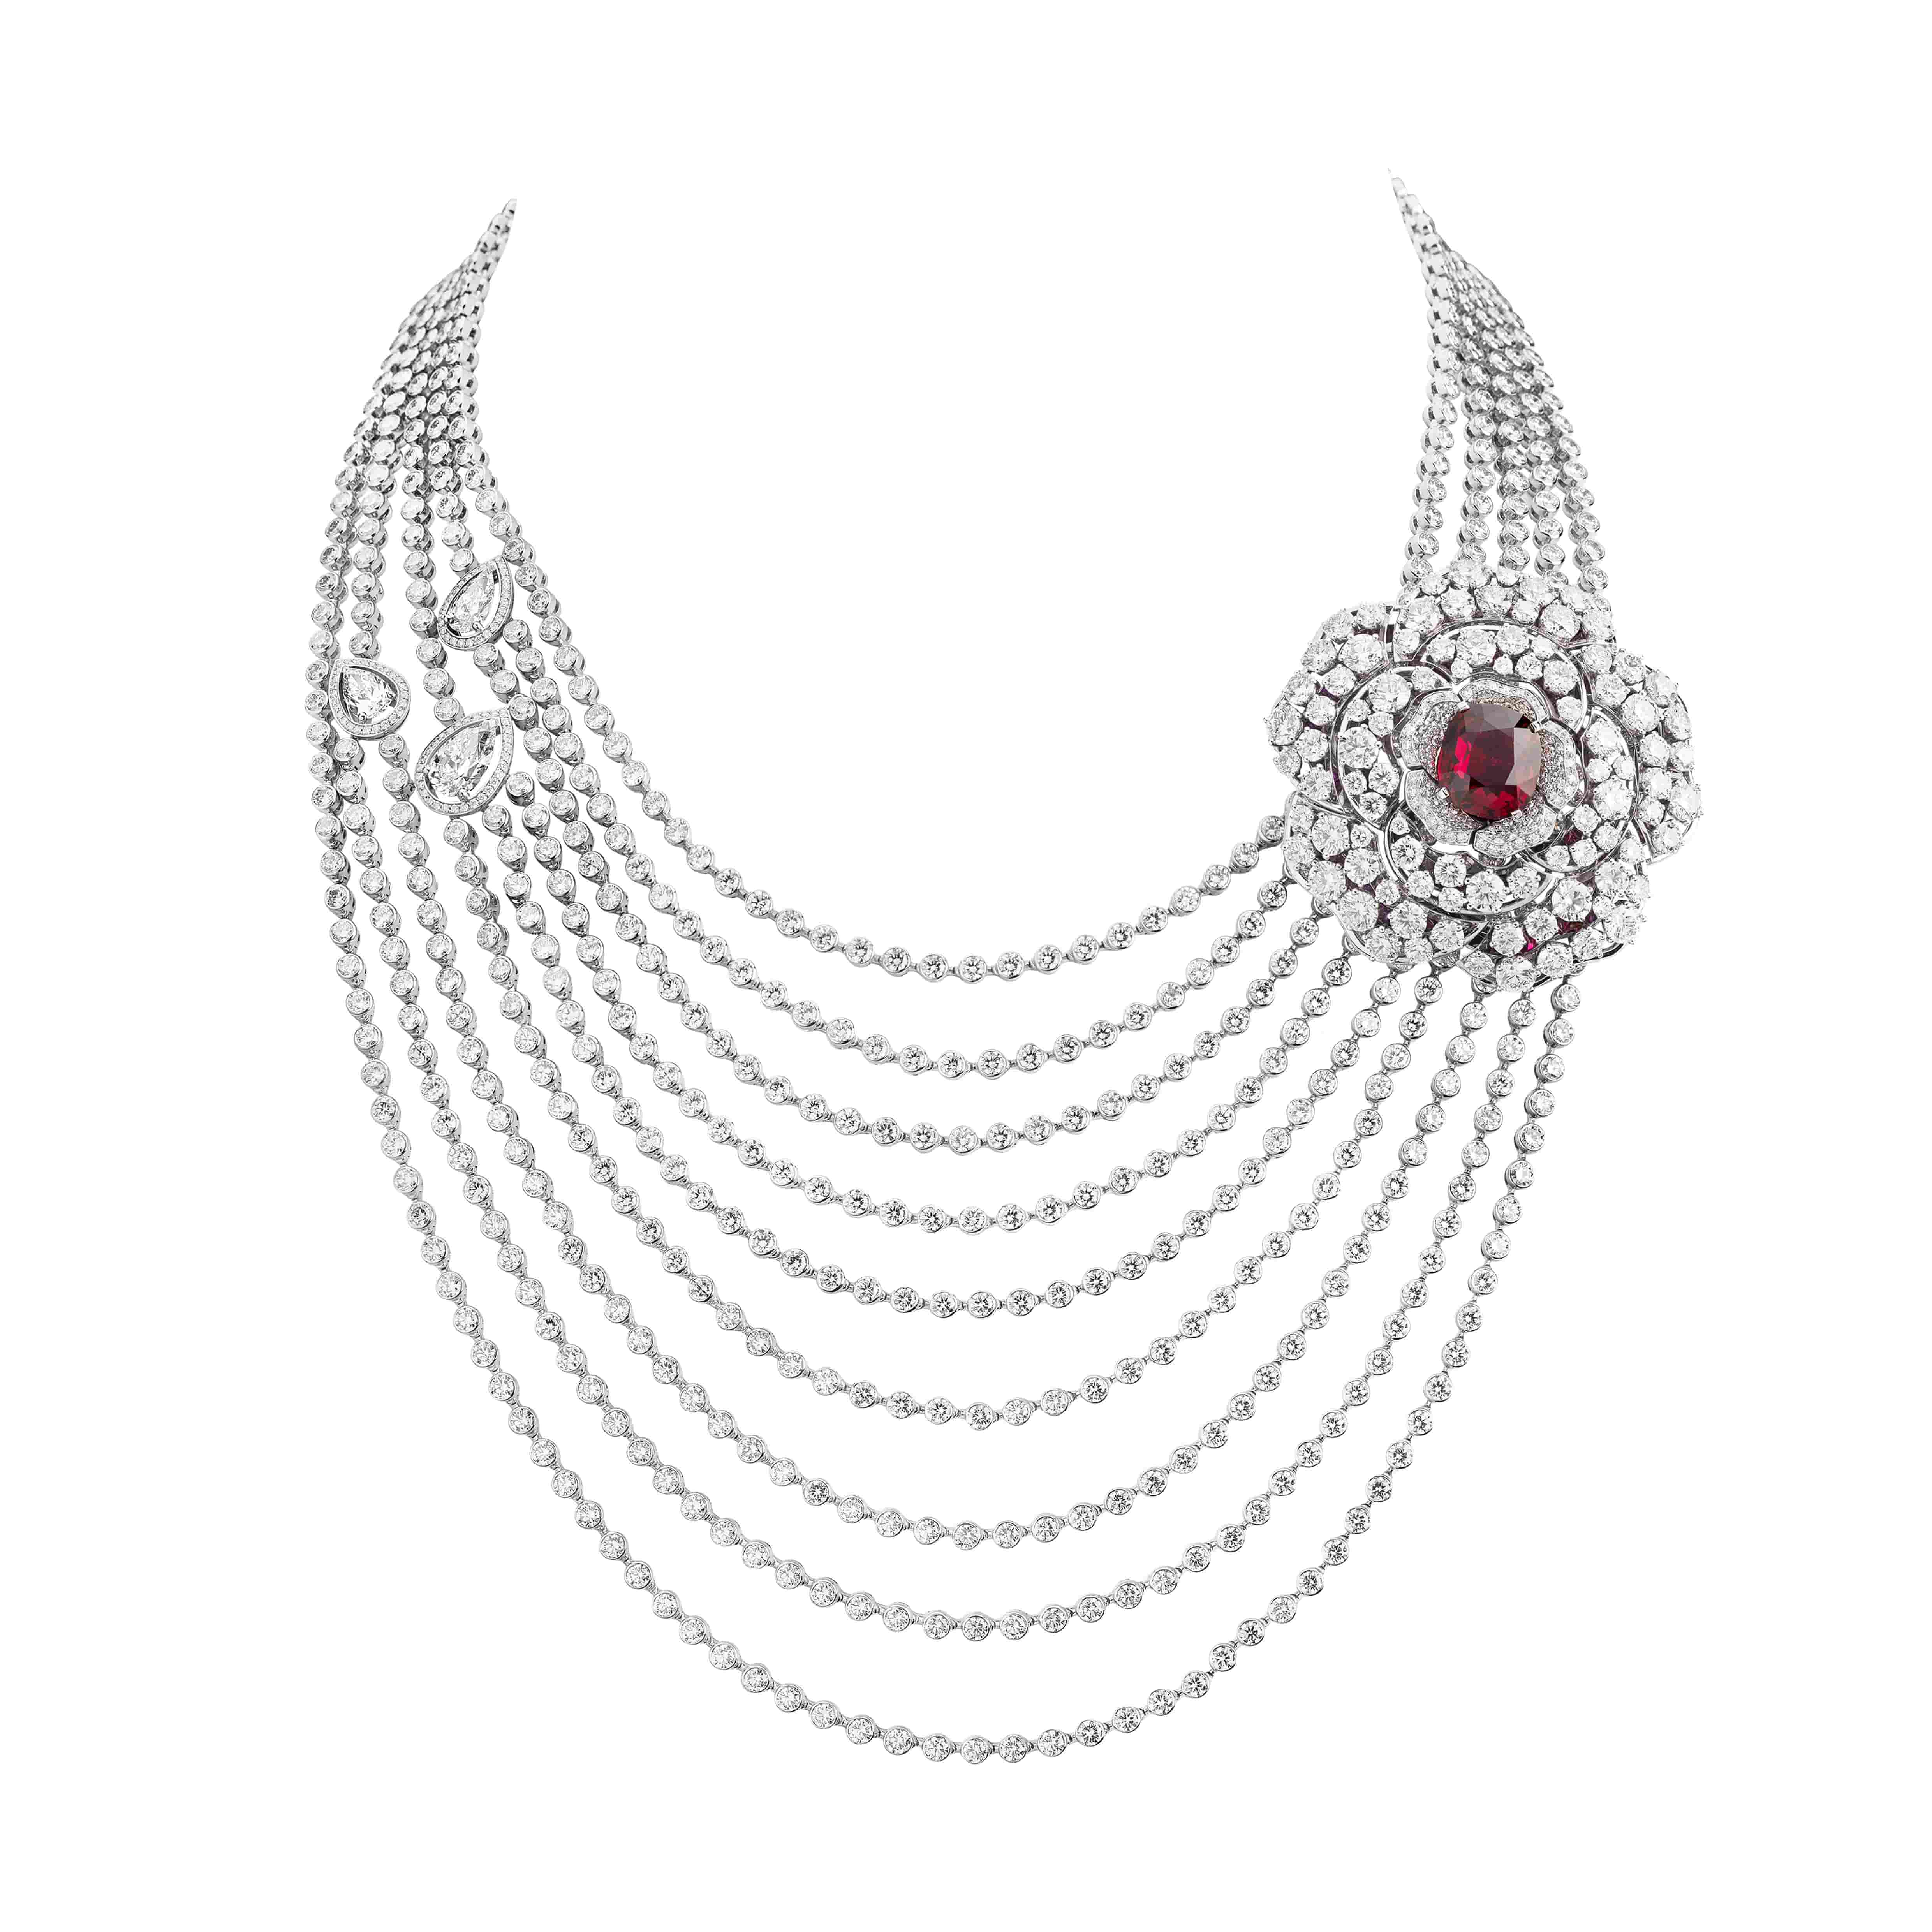 Chanel Launches A Jaw Dropping New High Jewelry Collection